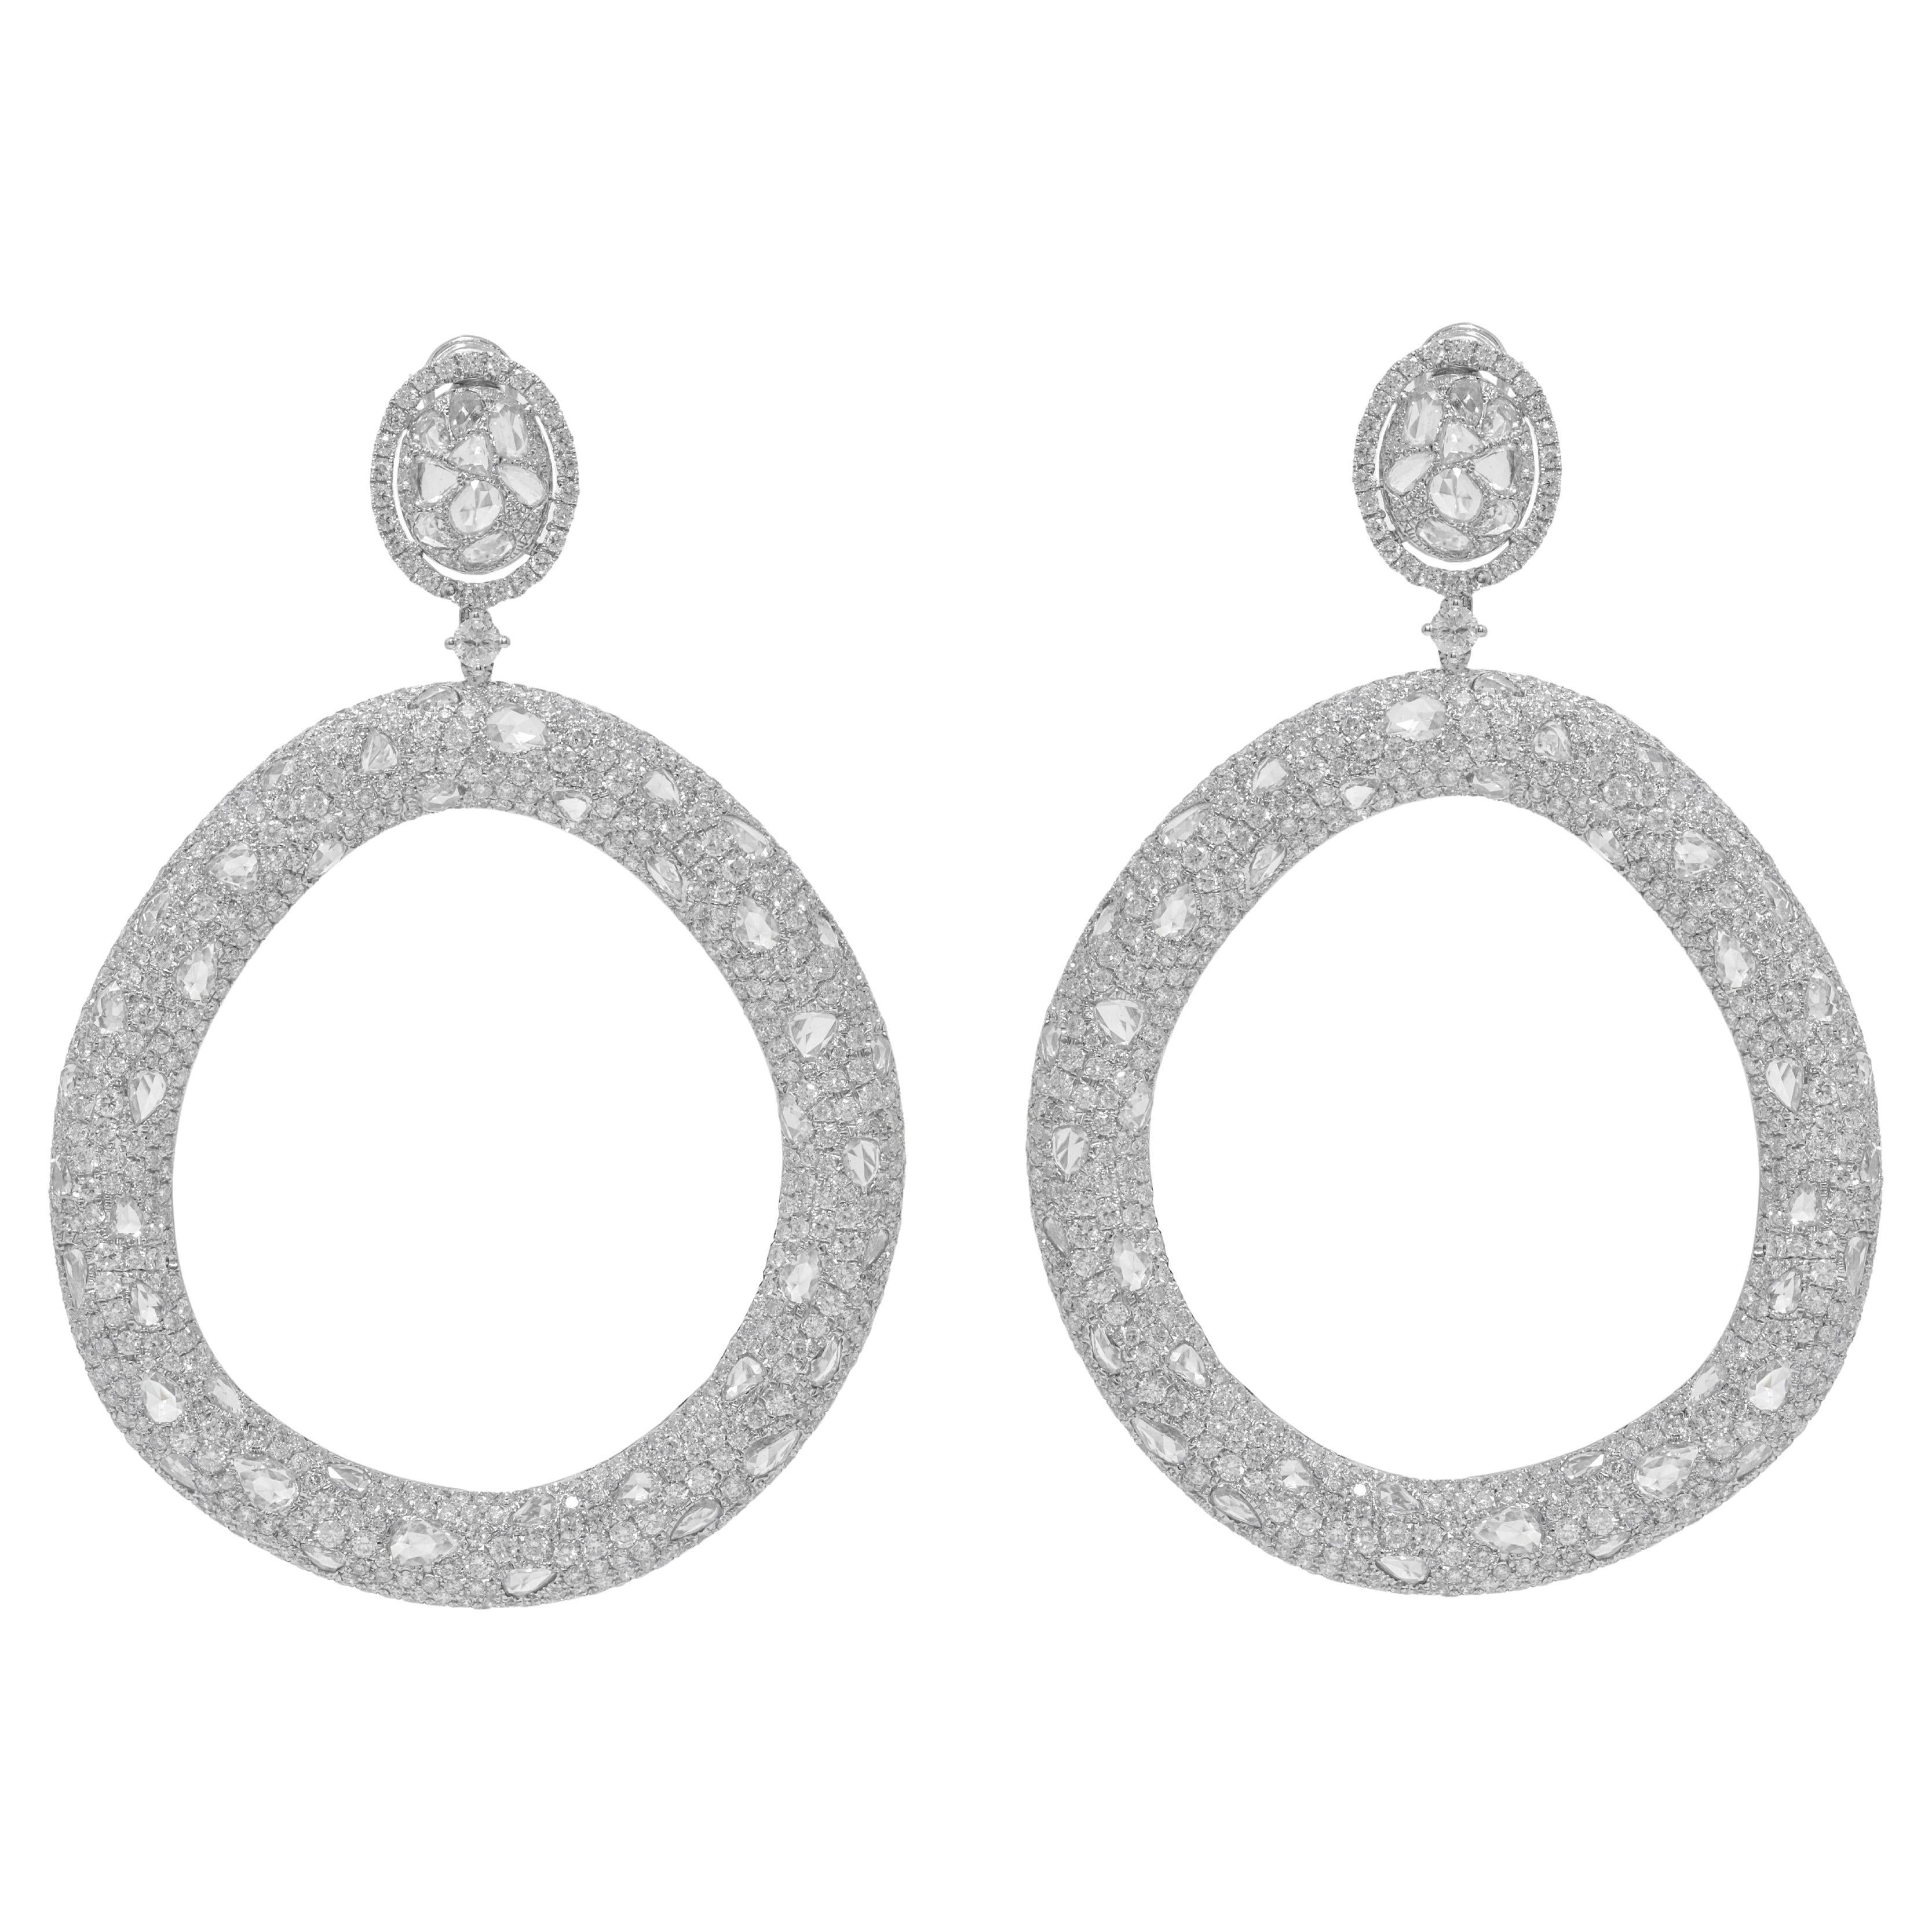 Diana M. 18 kt White Gold Bagel Shaped Fashion earrings adorned with 14.71 ct